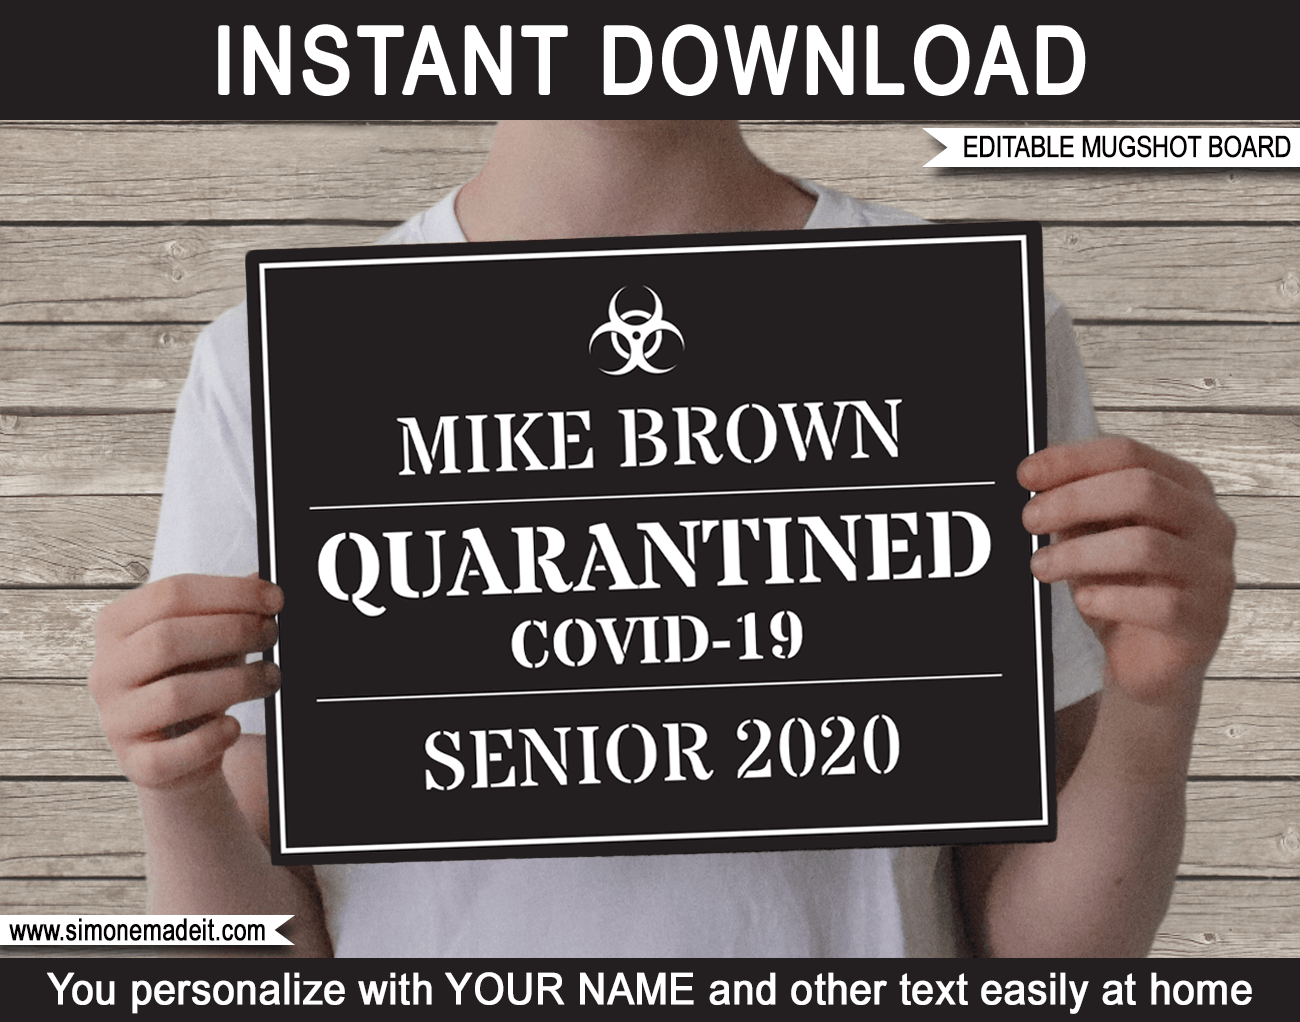 Instantly download this printable Quarantine Mugshot Sign Board template, c...